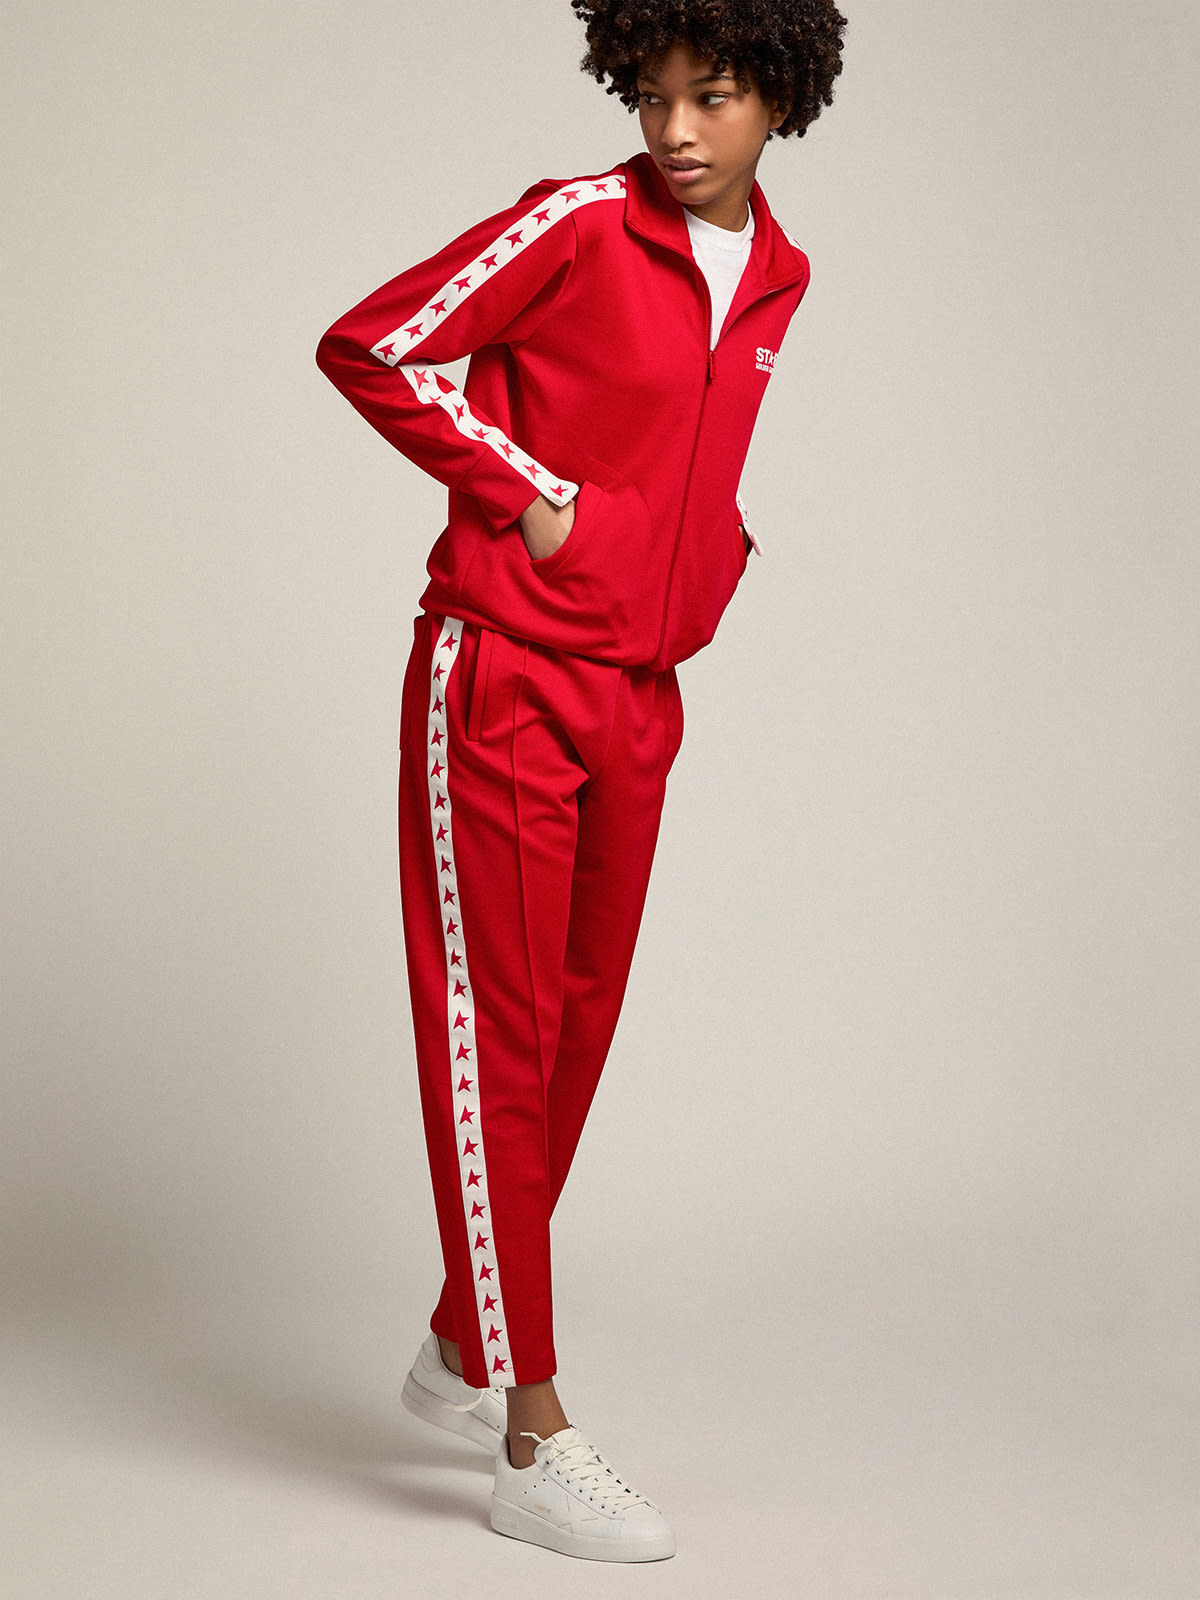 Golden Goose - Women’s red zipped sweatshirt with contrasting red stars in 